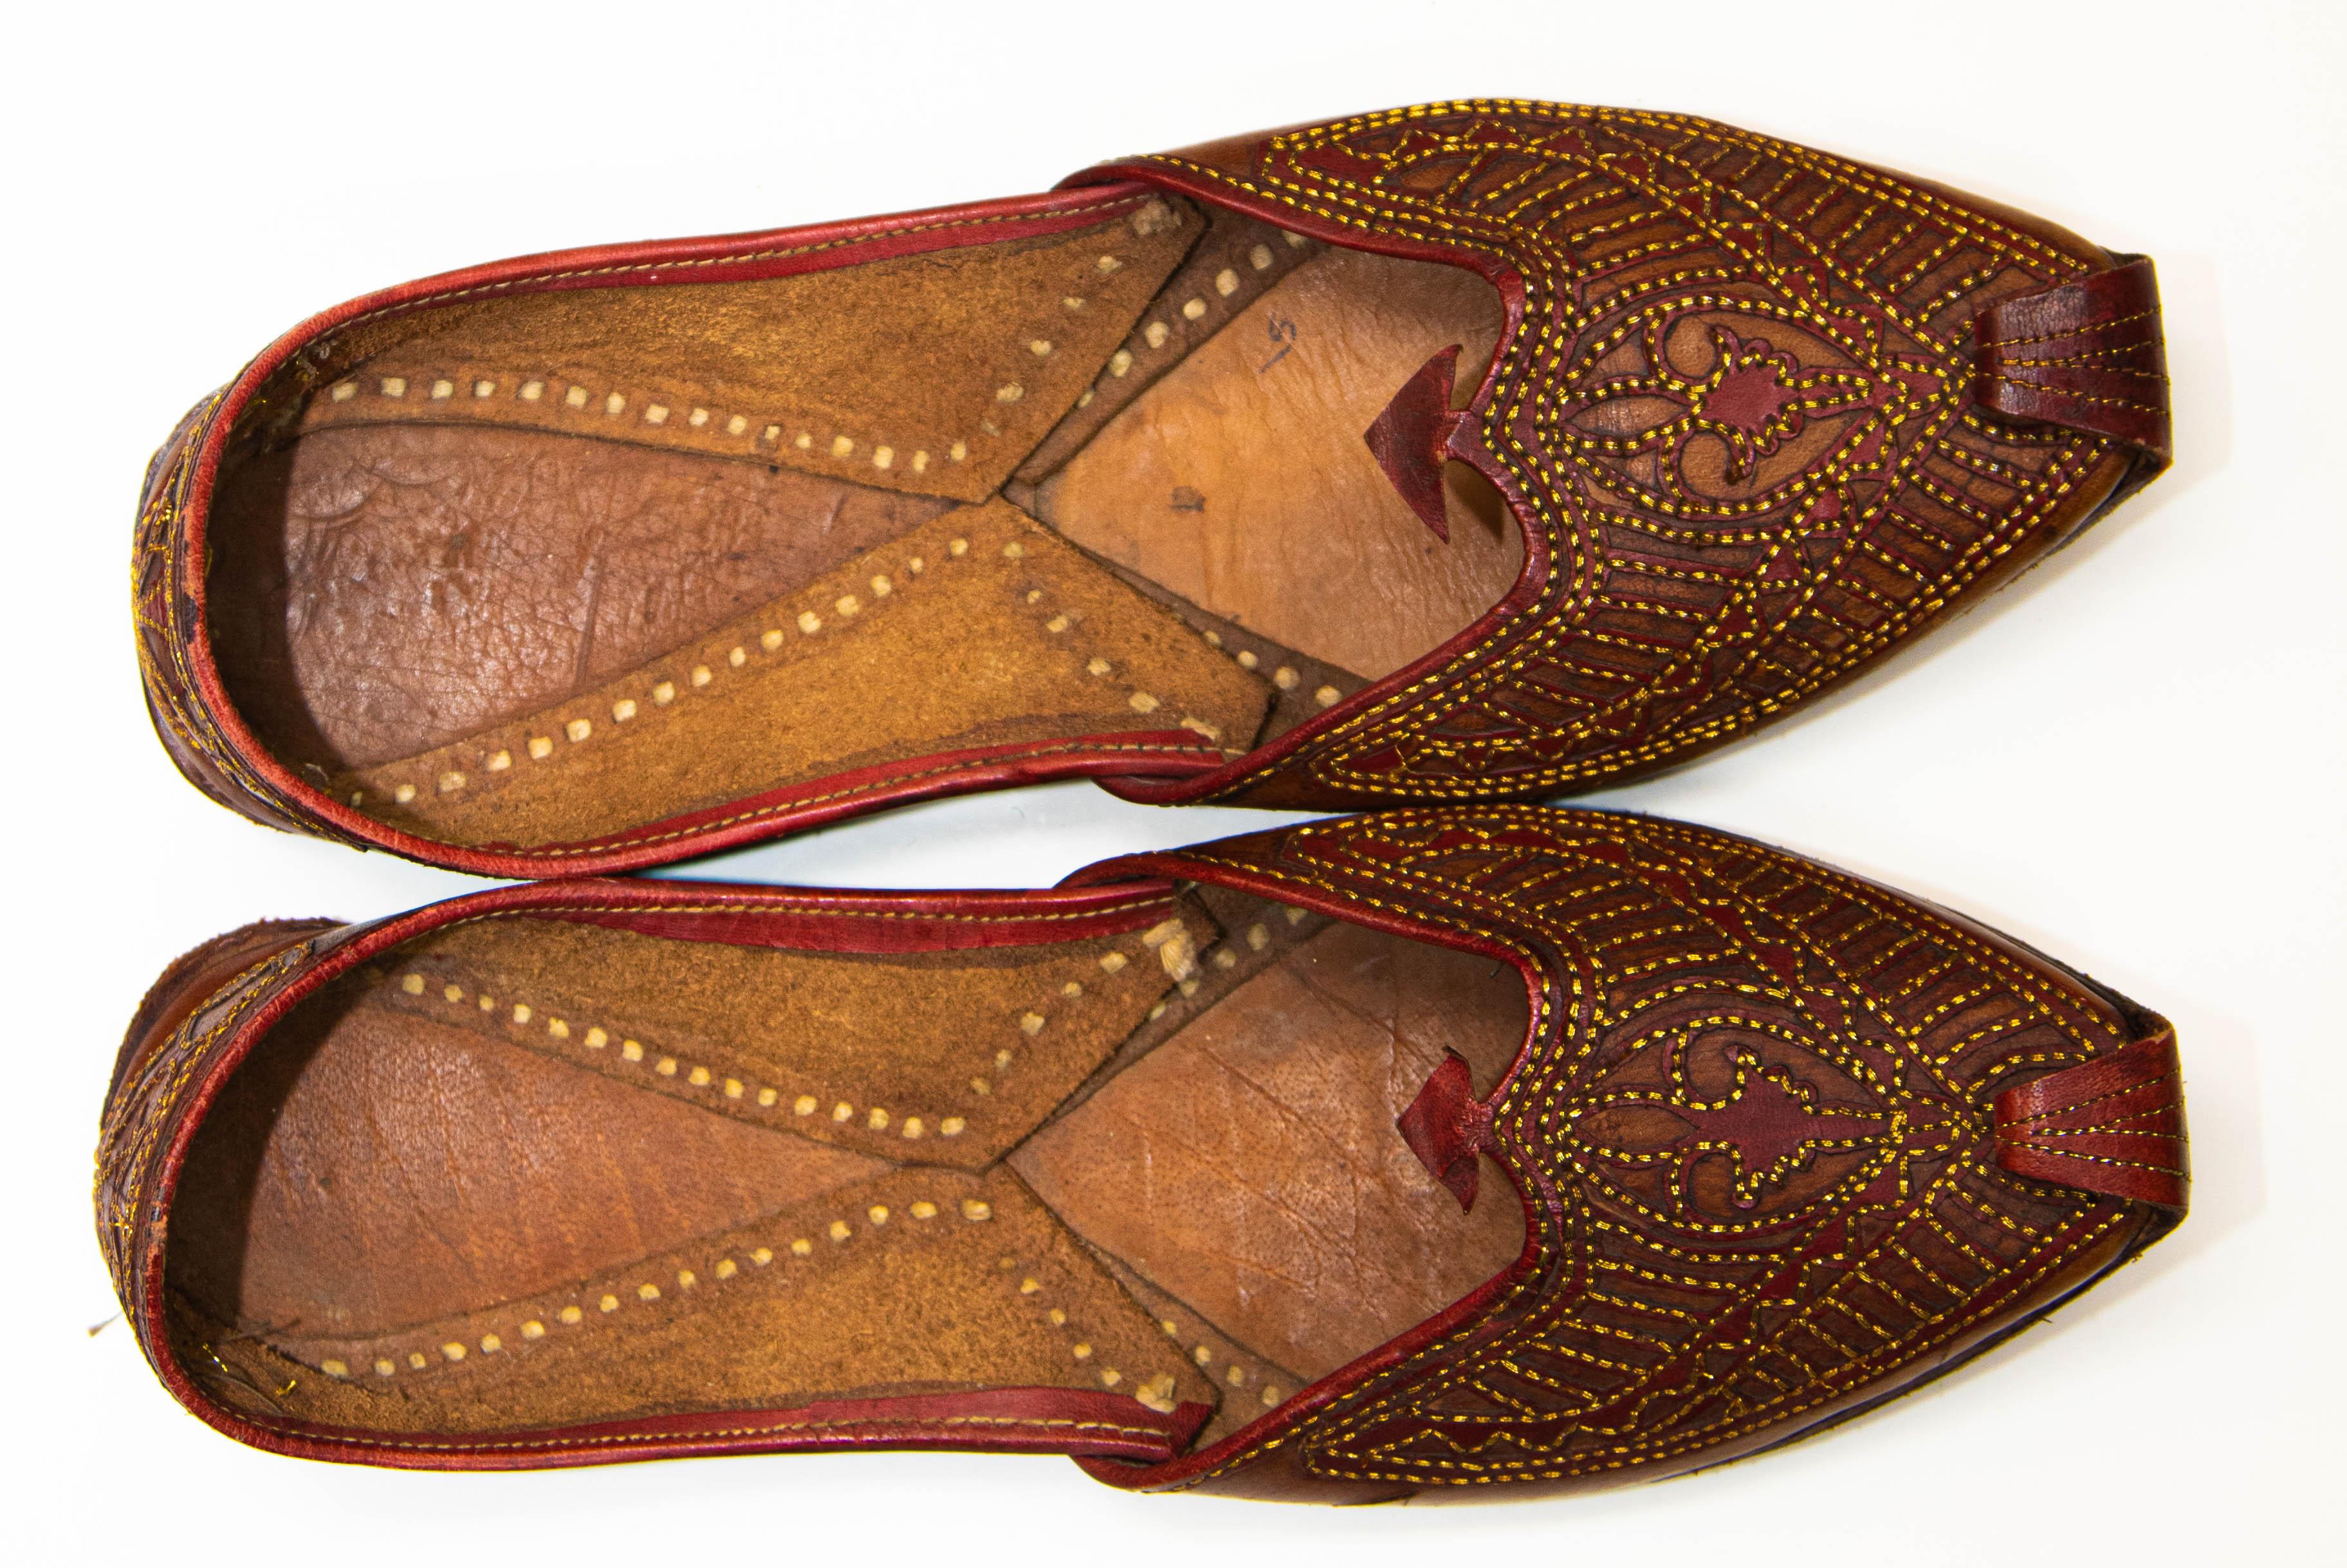 Vintage Arabian Mughal Leather Shoes with Gold Embroidered Curled Toe For Sale 4